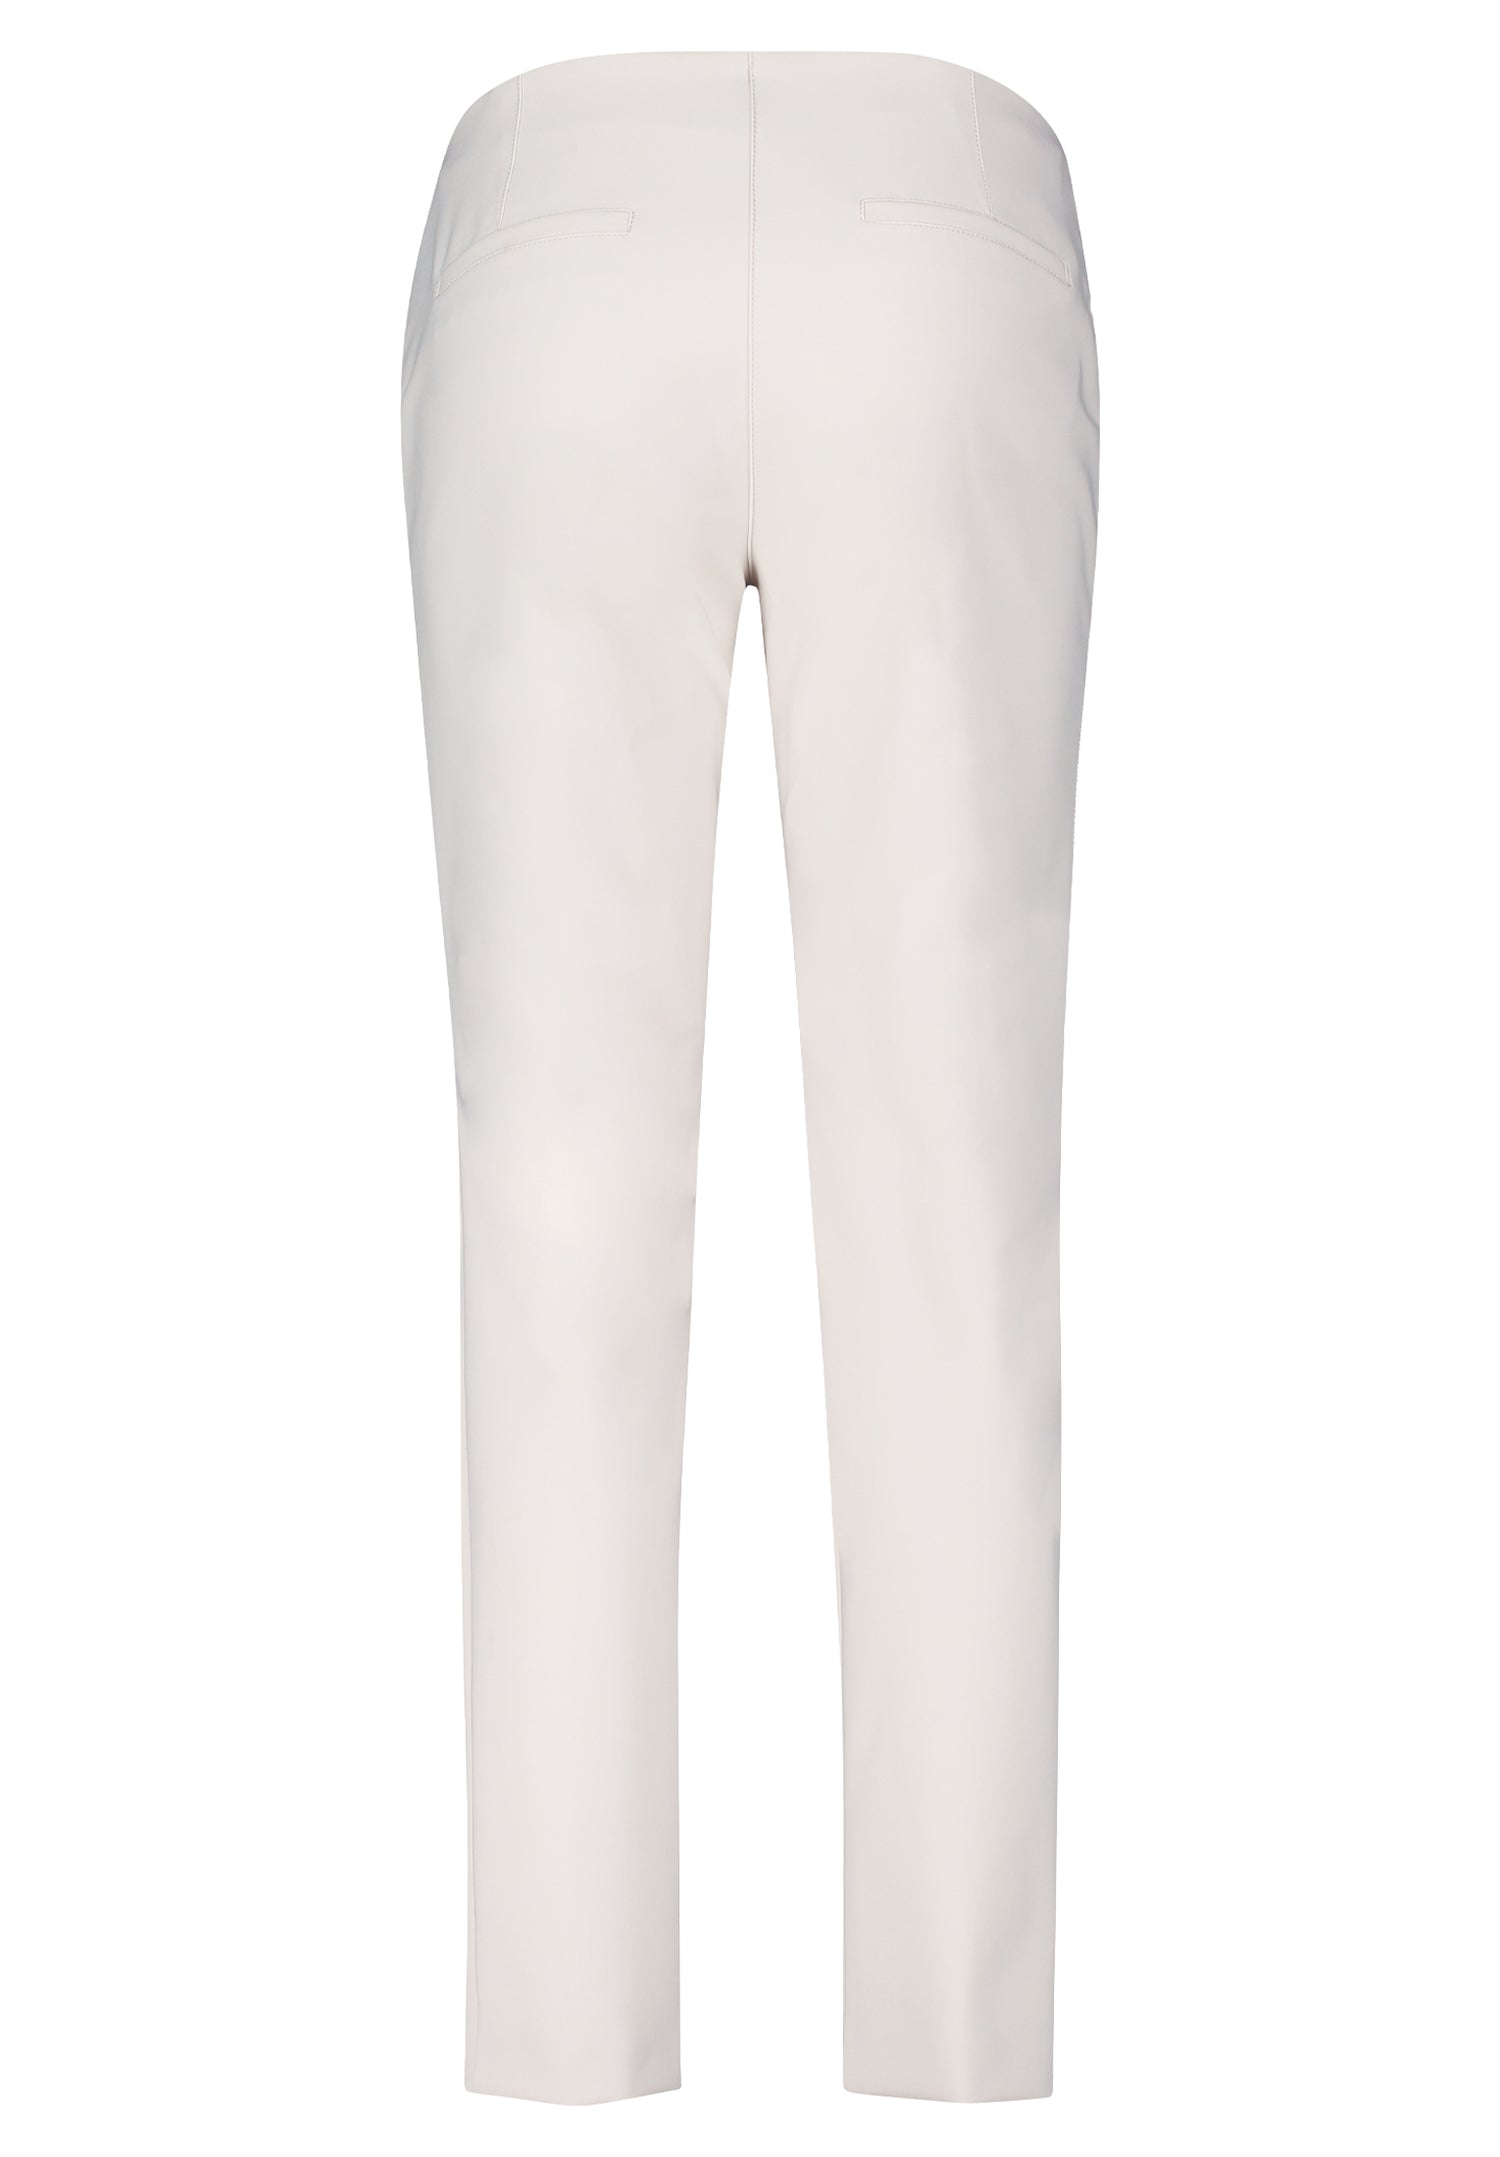 Beige Skinny Fit Chino Trousers_6812-2150_9106_06